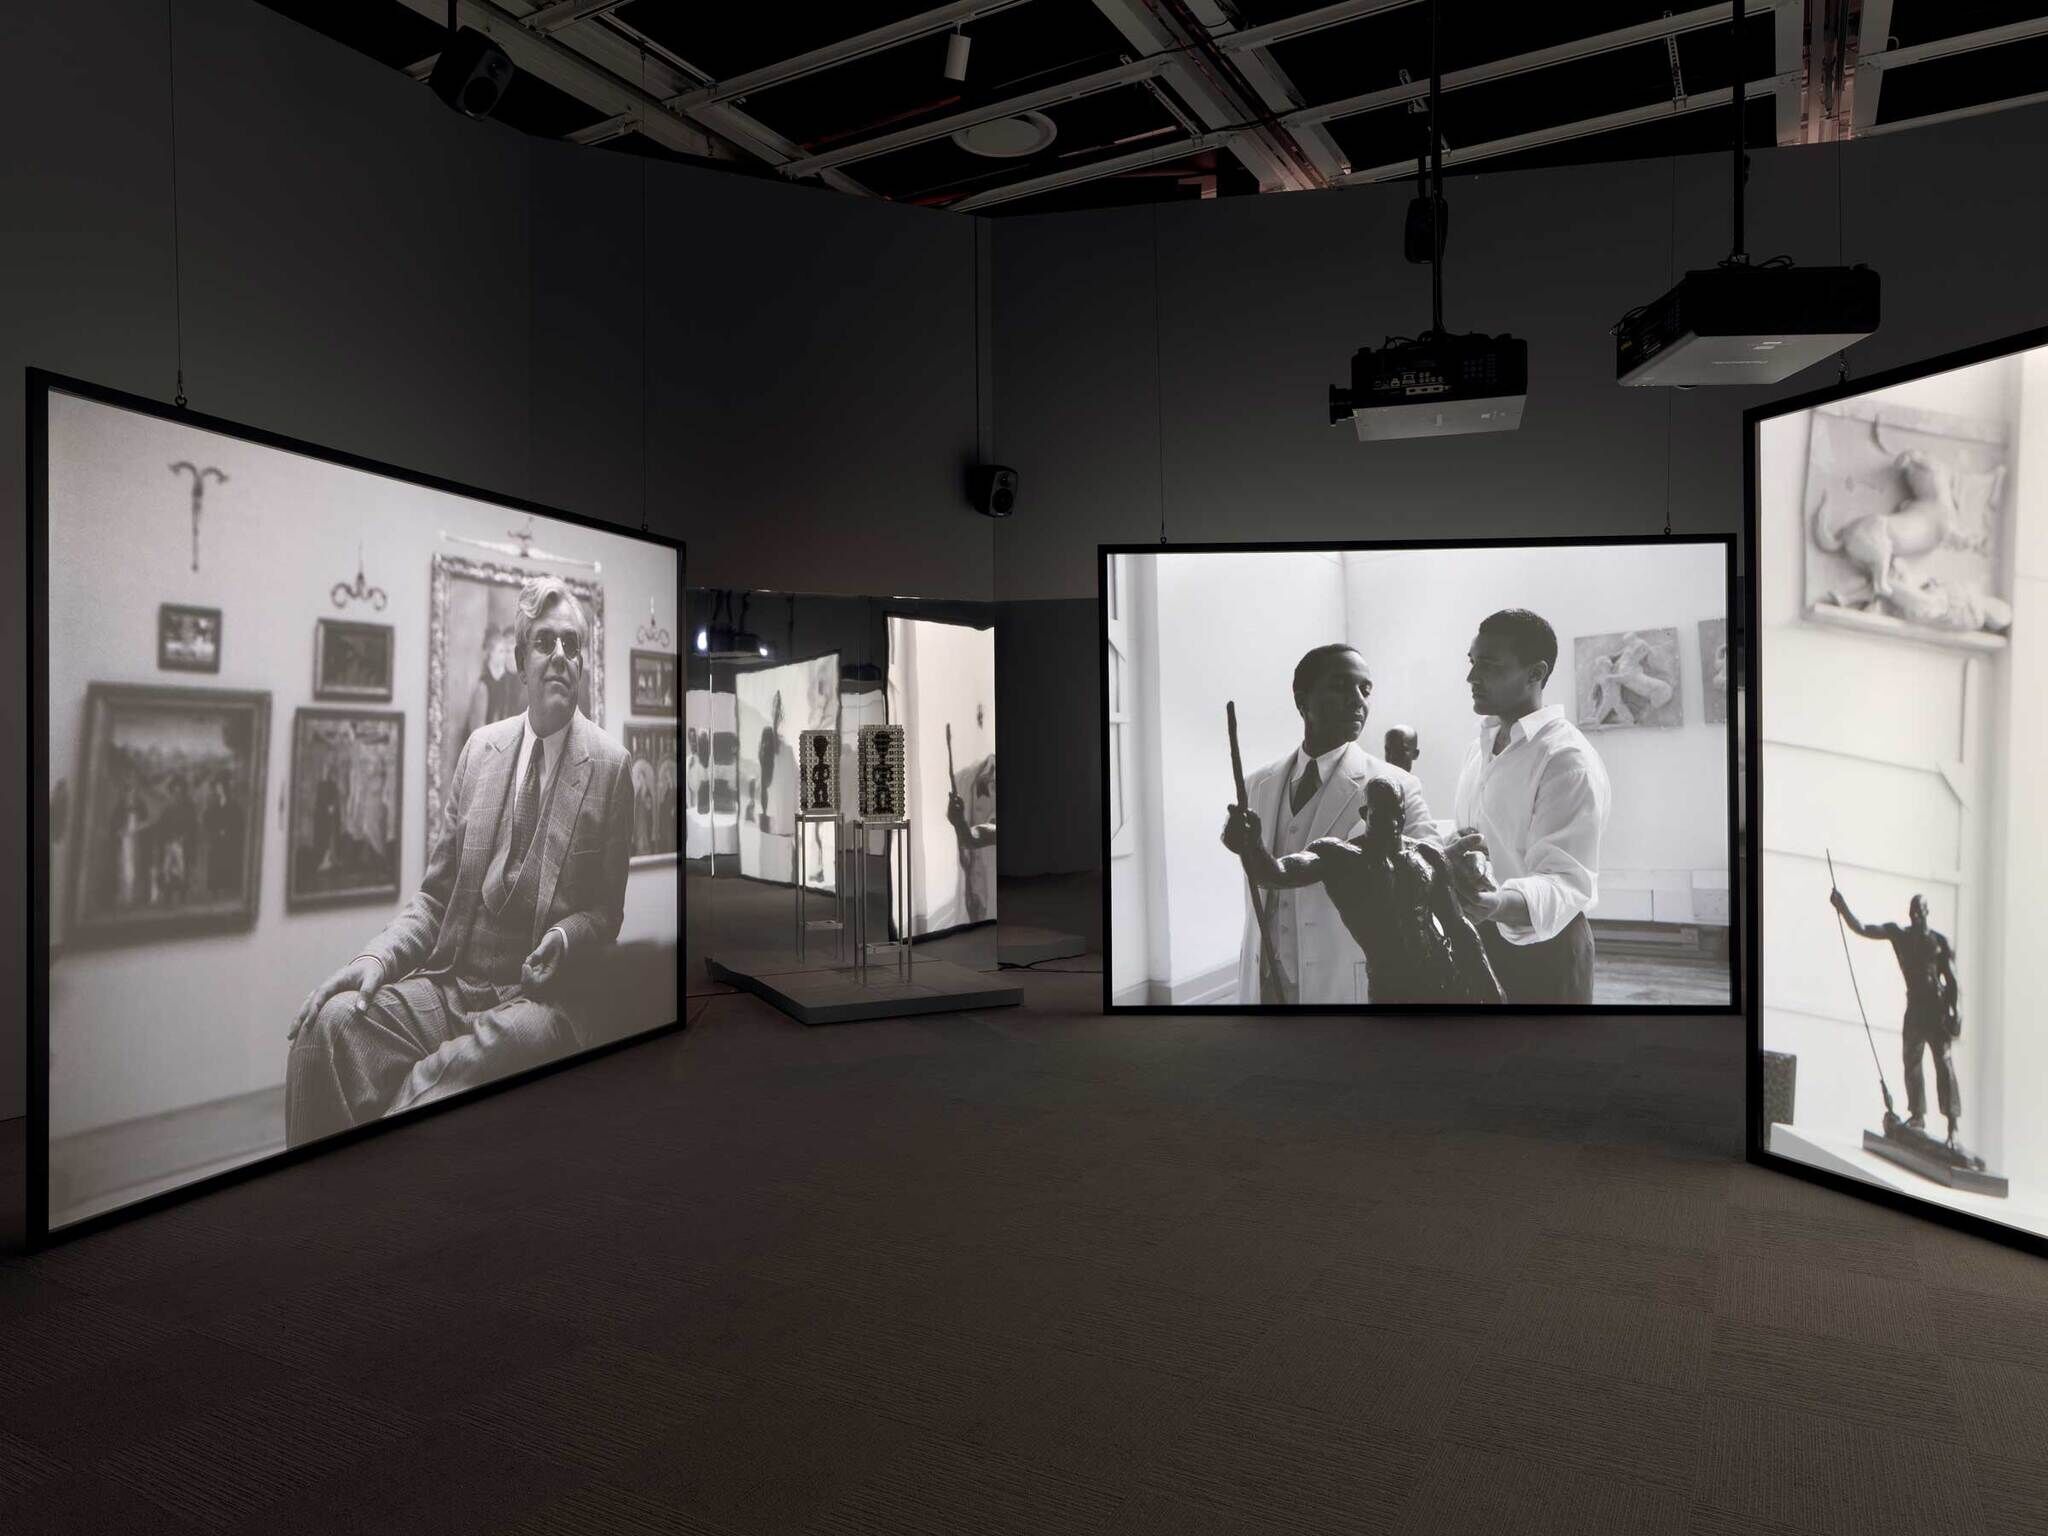 Art exhibition with large monochrome photographs displayed on screens in a dimly lit room.